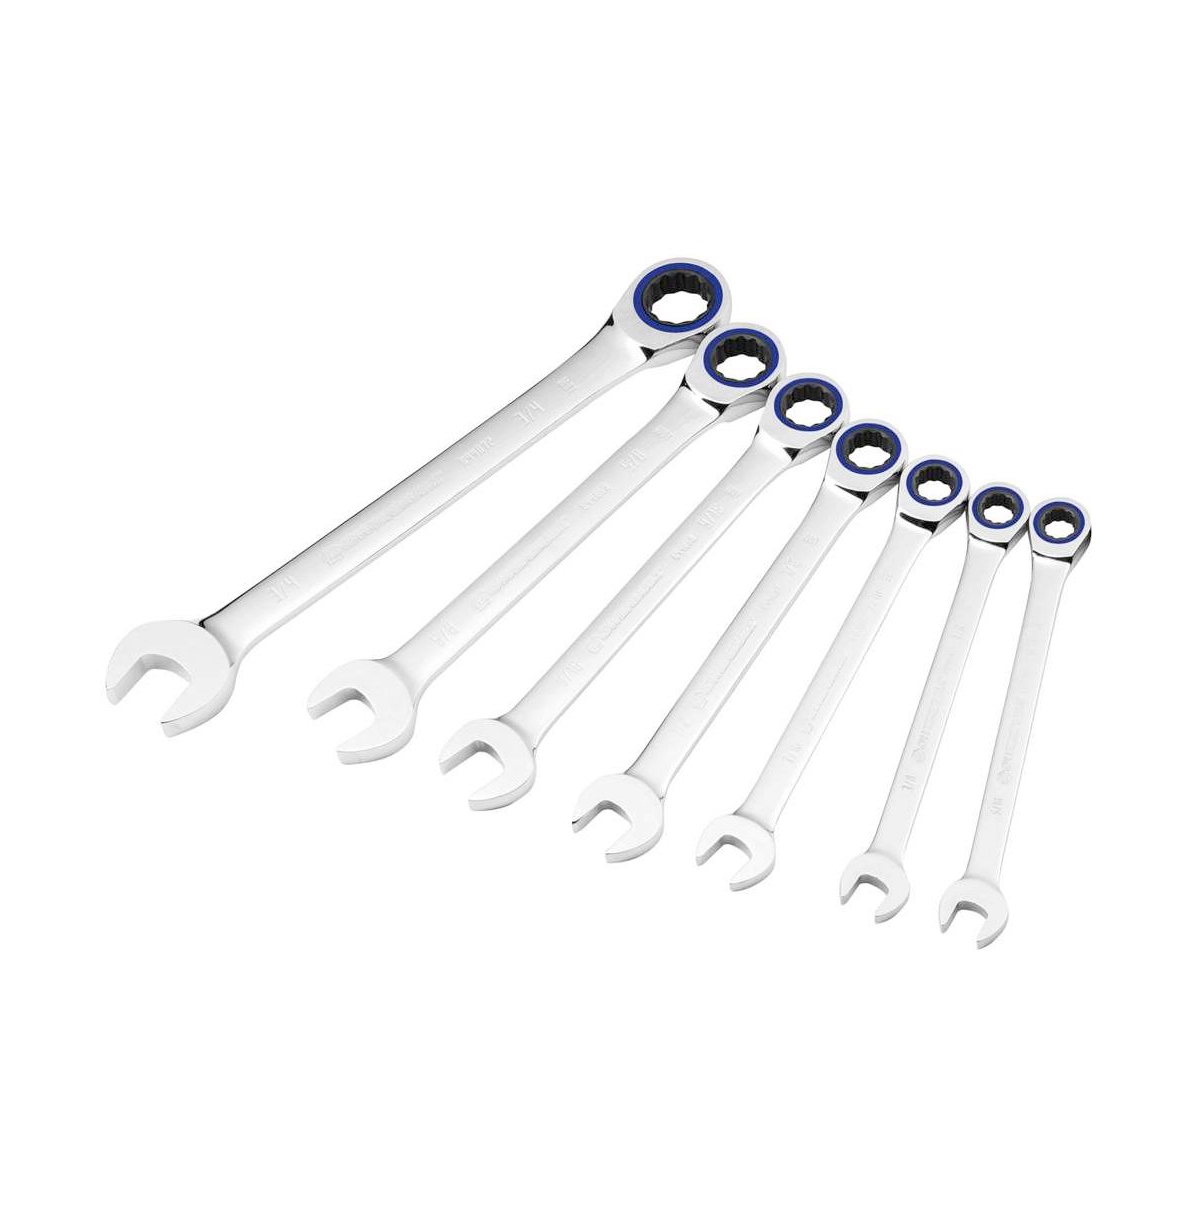 7 Piece Sae 100 Tooth Ratcheting Wrench Set - Silver